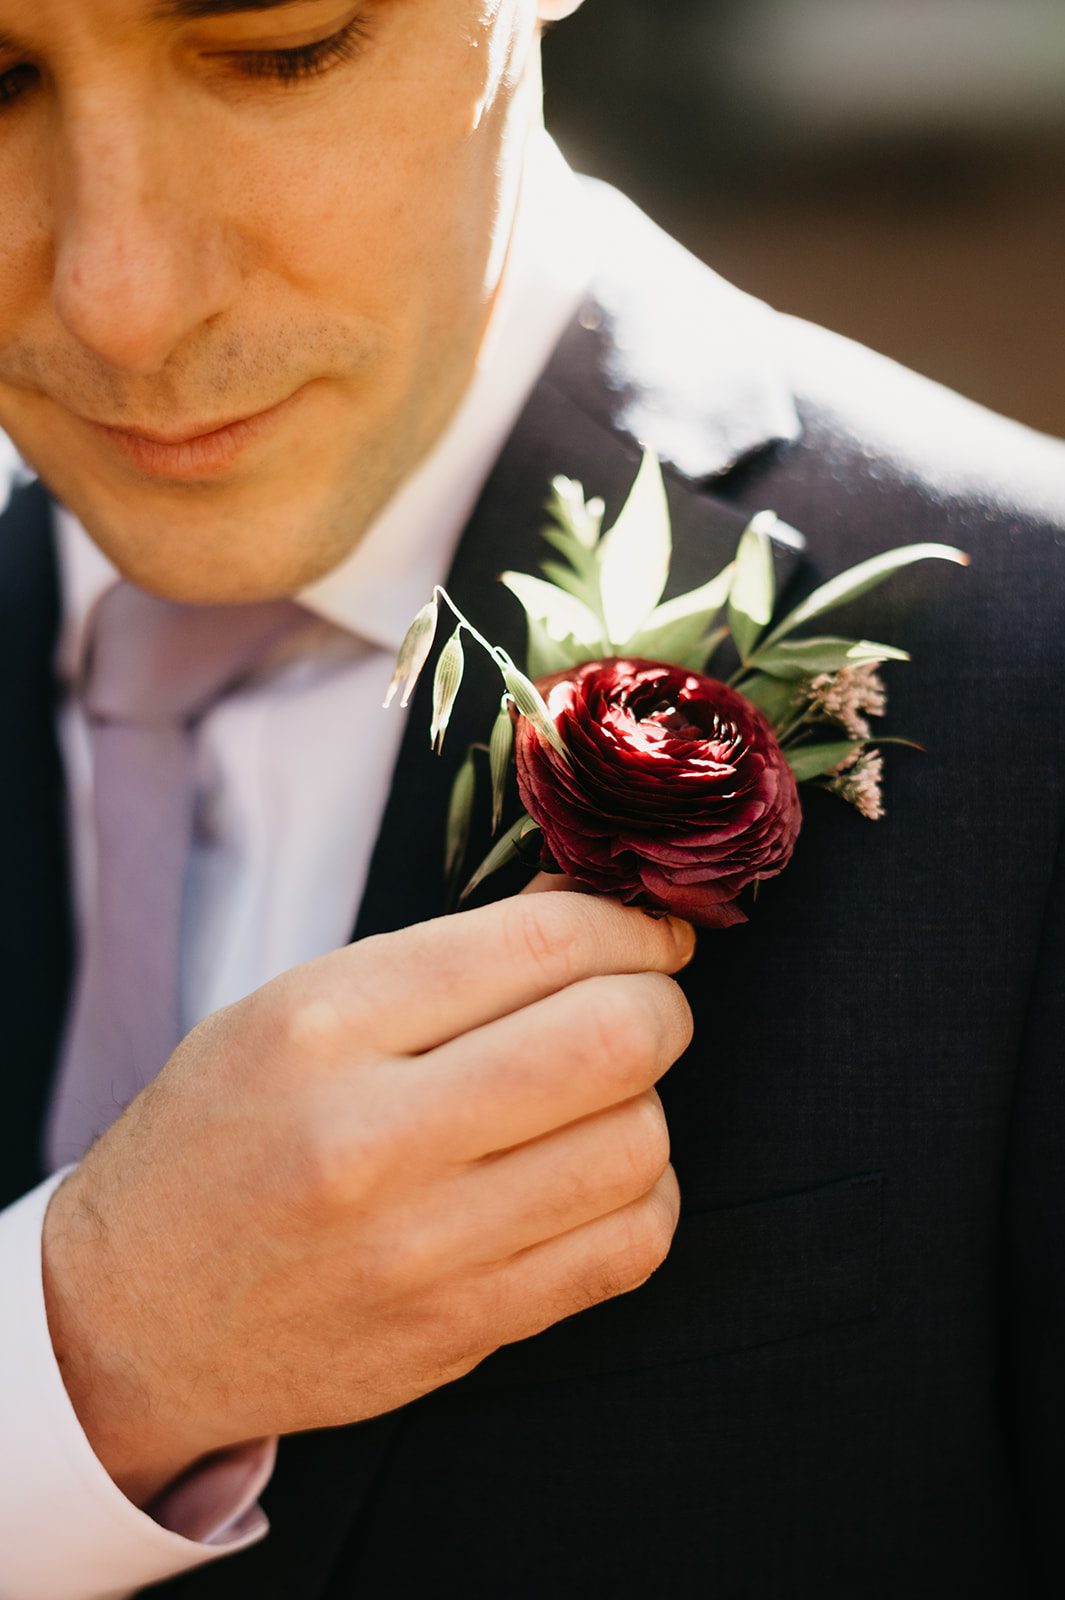 The groom in a dark suit puts his boutonniere on his suit coat. 